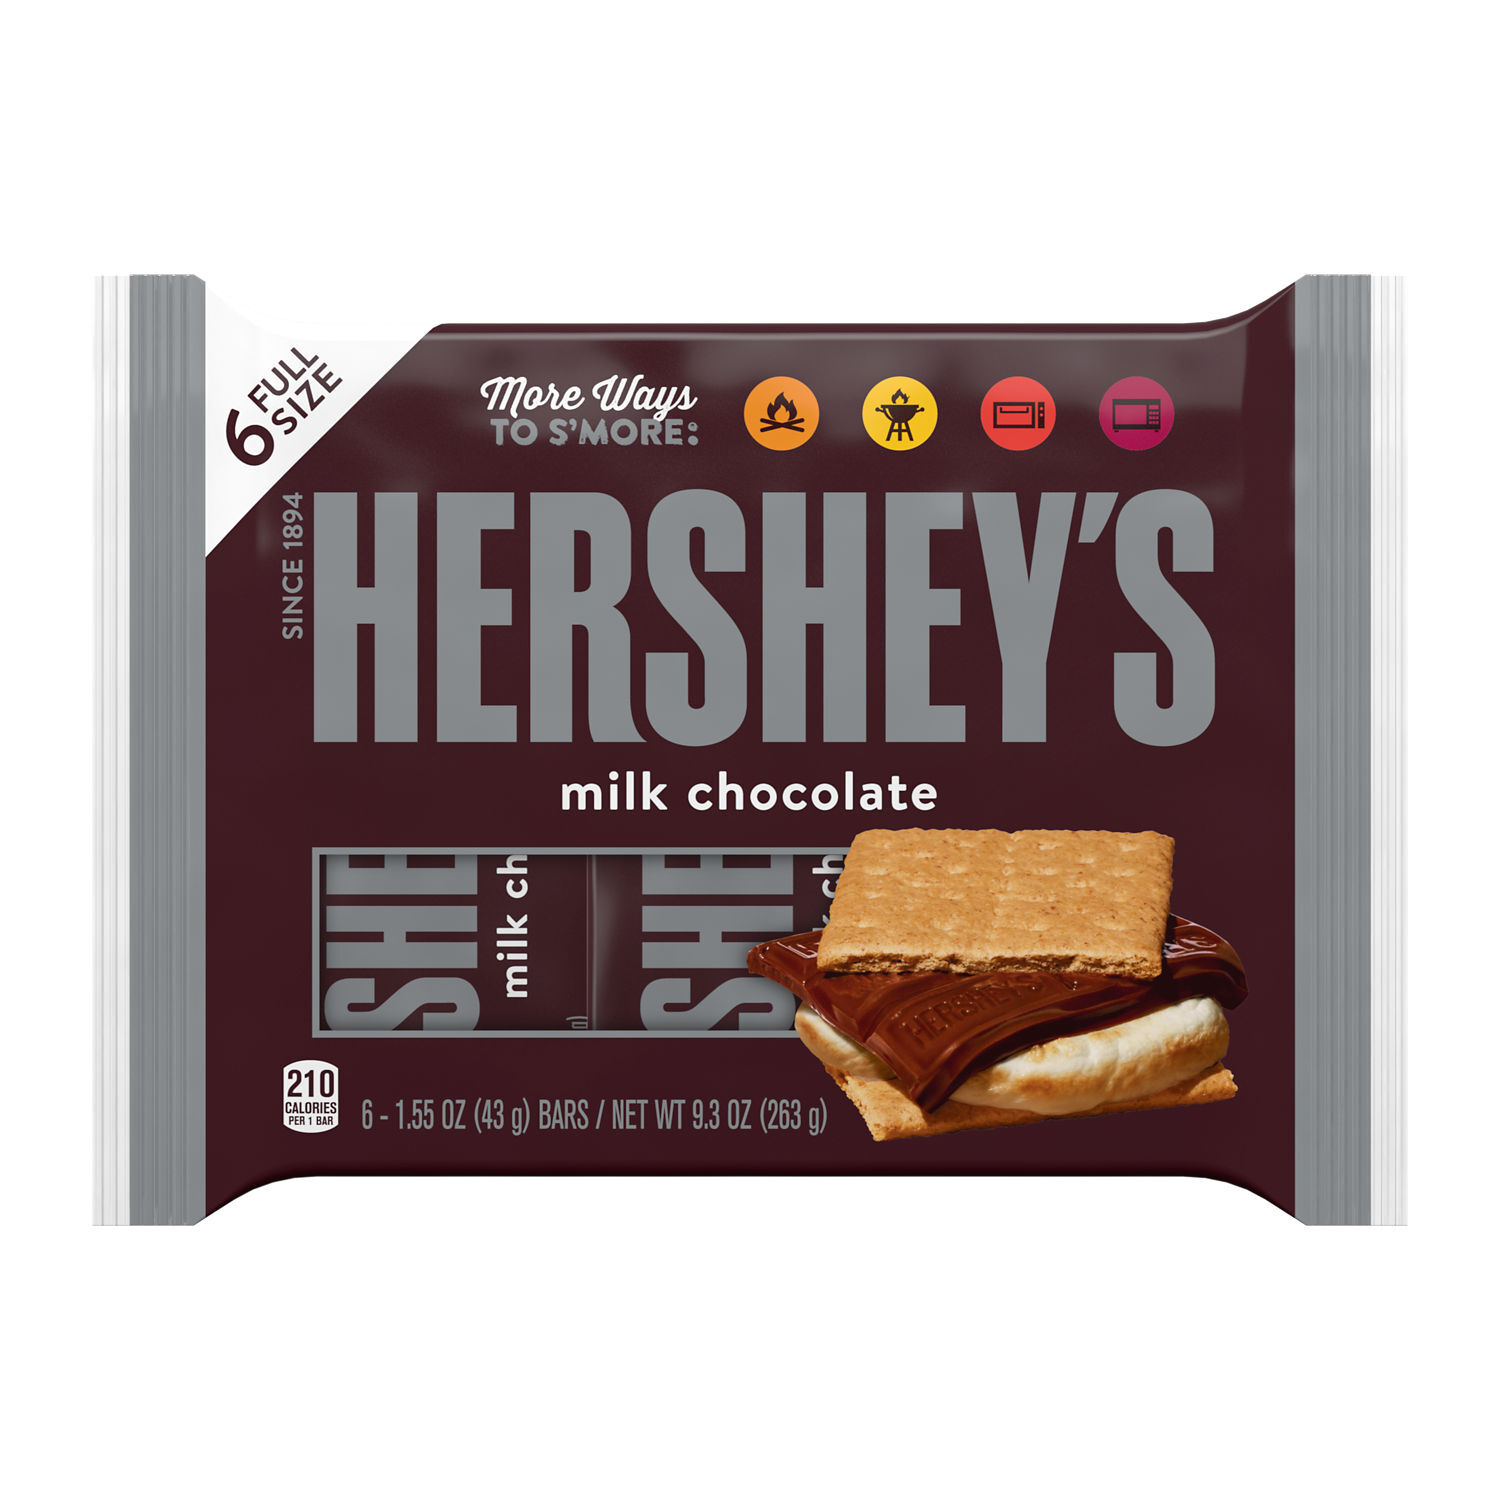 HERSHEY'S | HERSHEY'S | FREE 1-3 Day Delivery